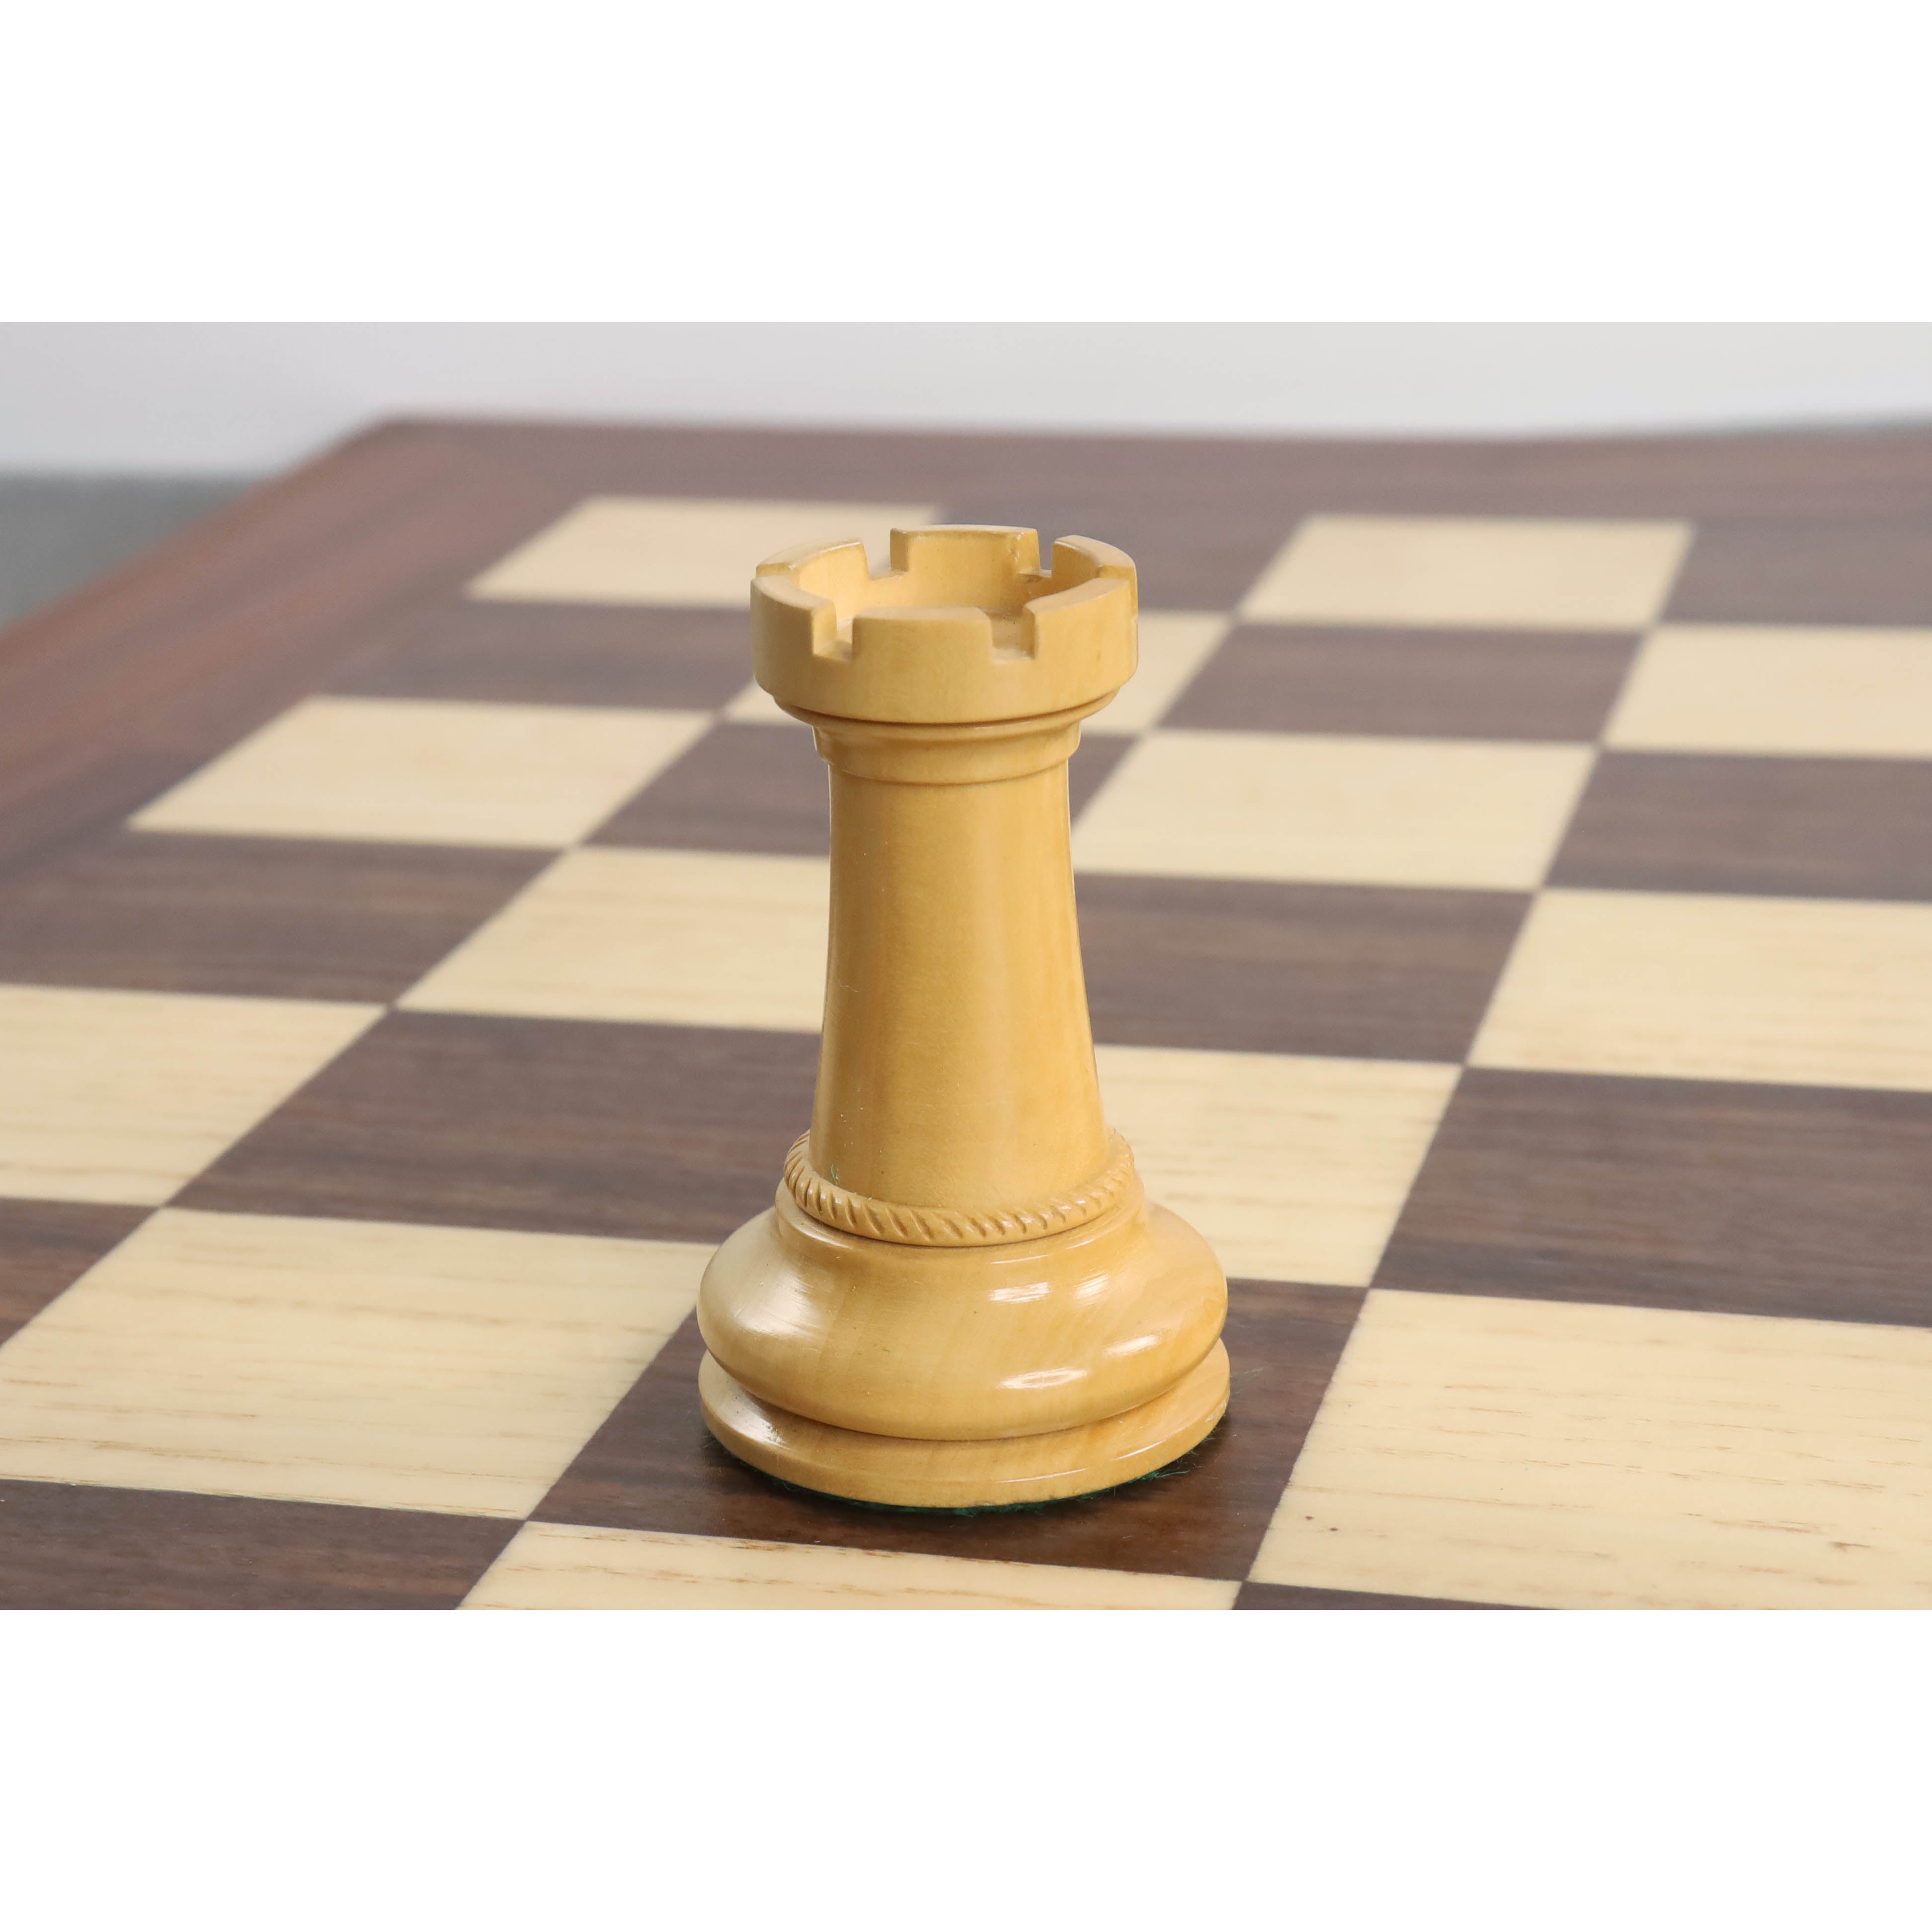 Combo of 4.5" Imperator Luxury Staunton Bud Rosewood Chess Pieces with 23" Bud Rosewood Chessboard and Storage Box